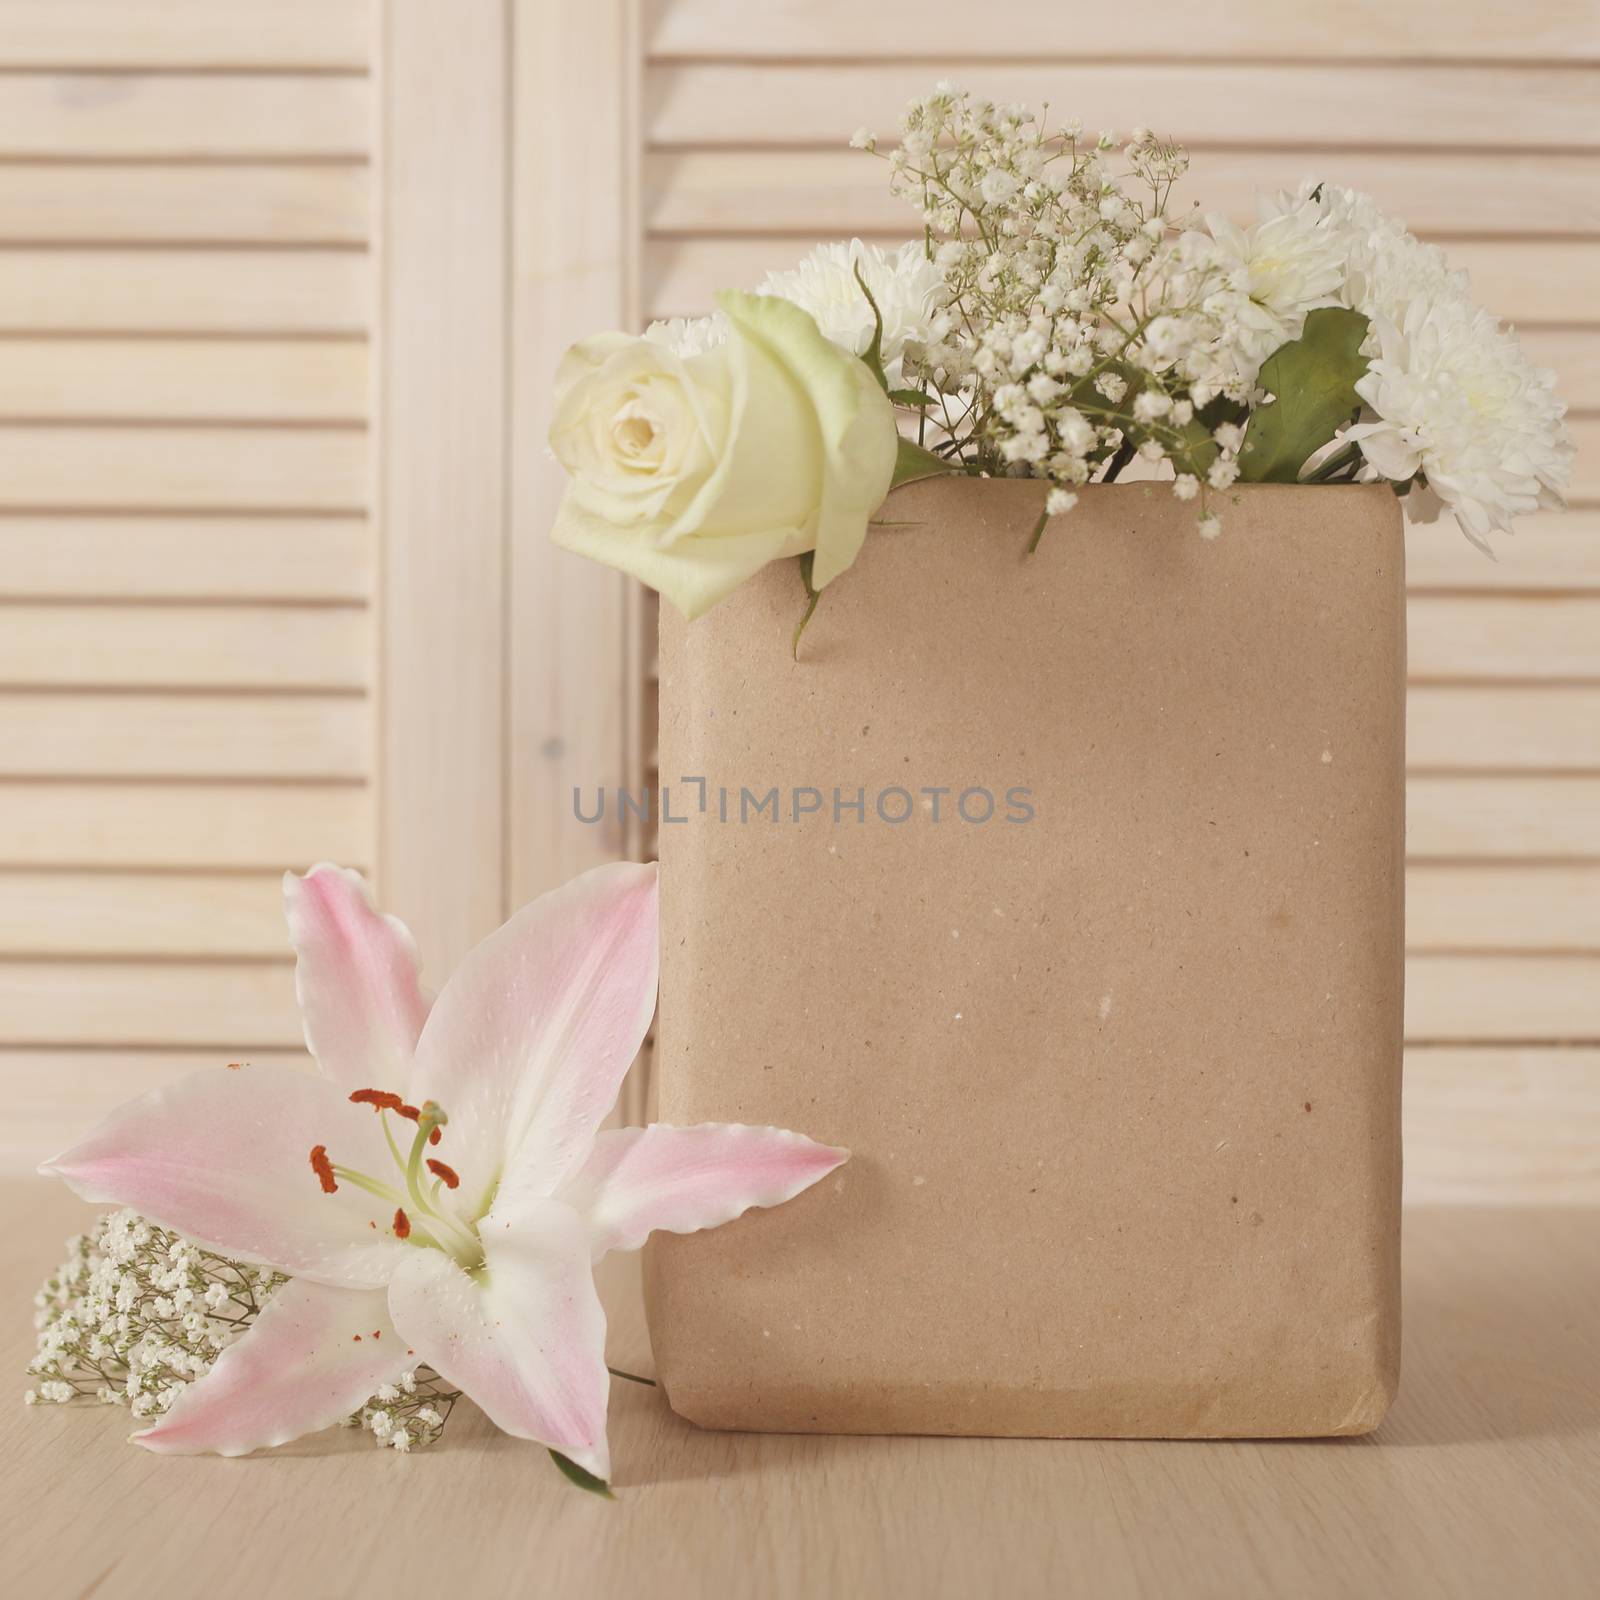 Valentine day bouquet of flowers in paper bag